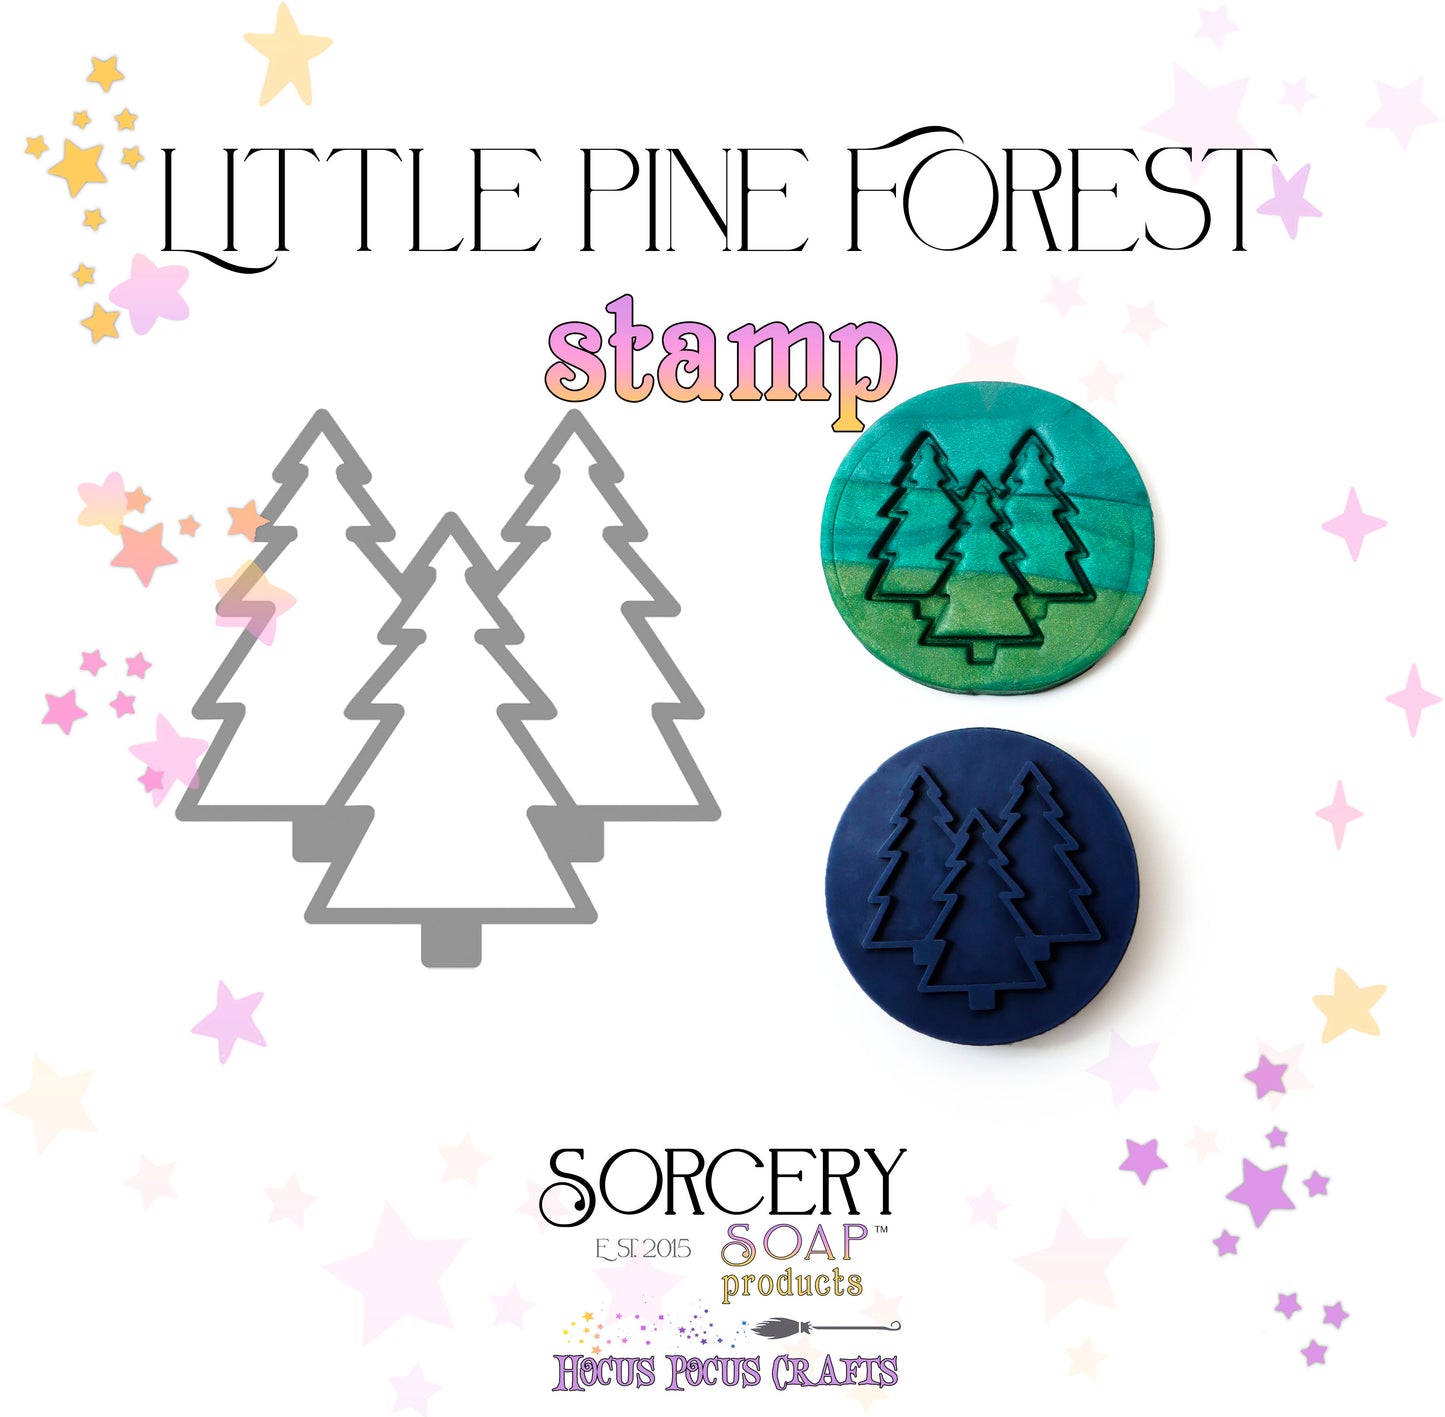 Little Pine Forest Stamp